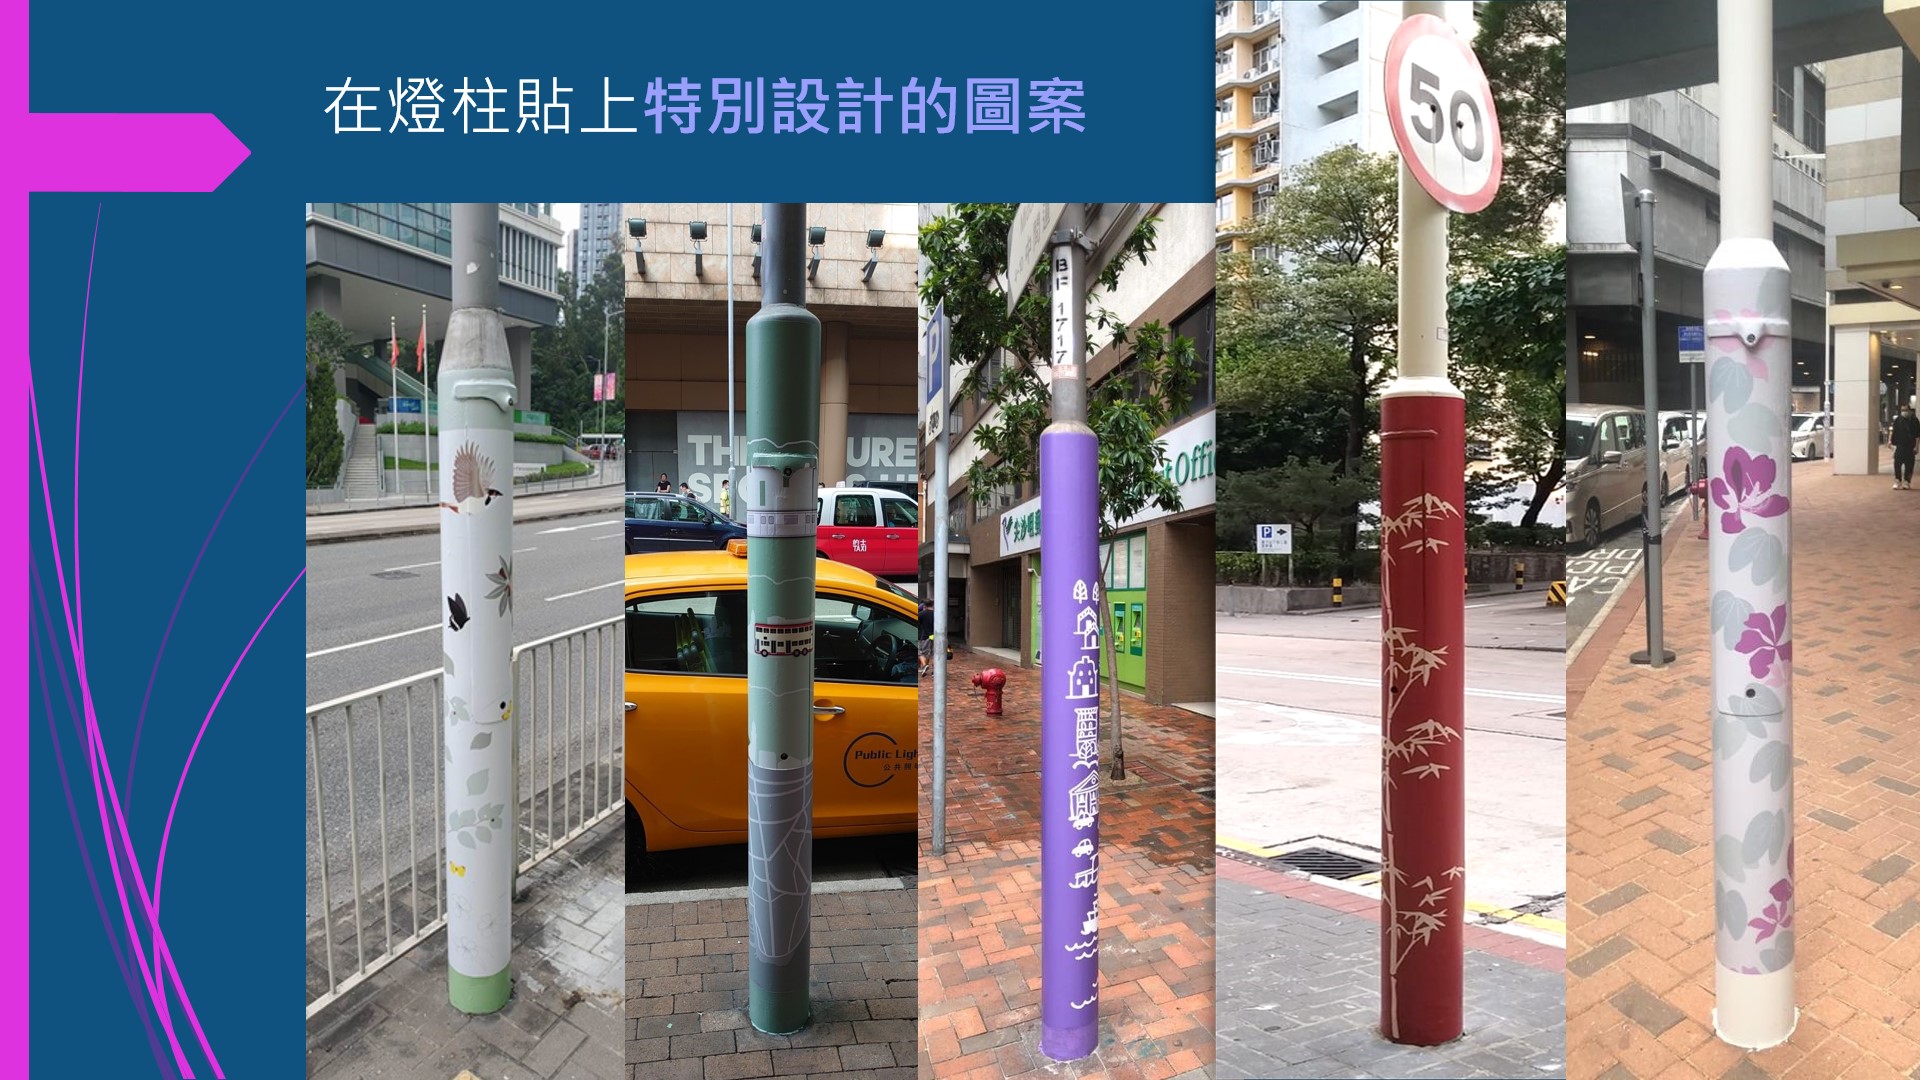 Photo 3: Lamppost affixing stickers with special design patterns at different districts